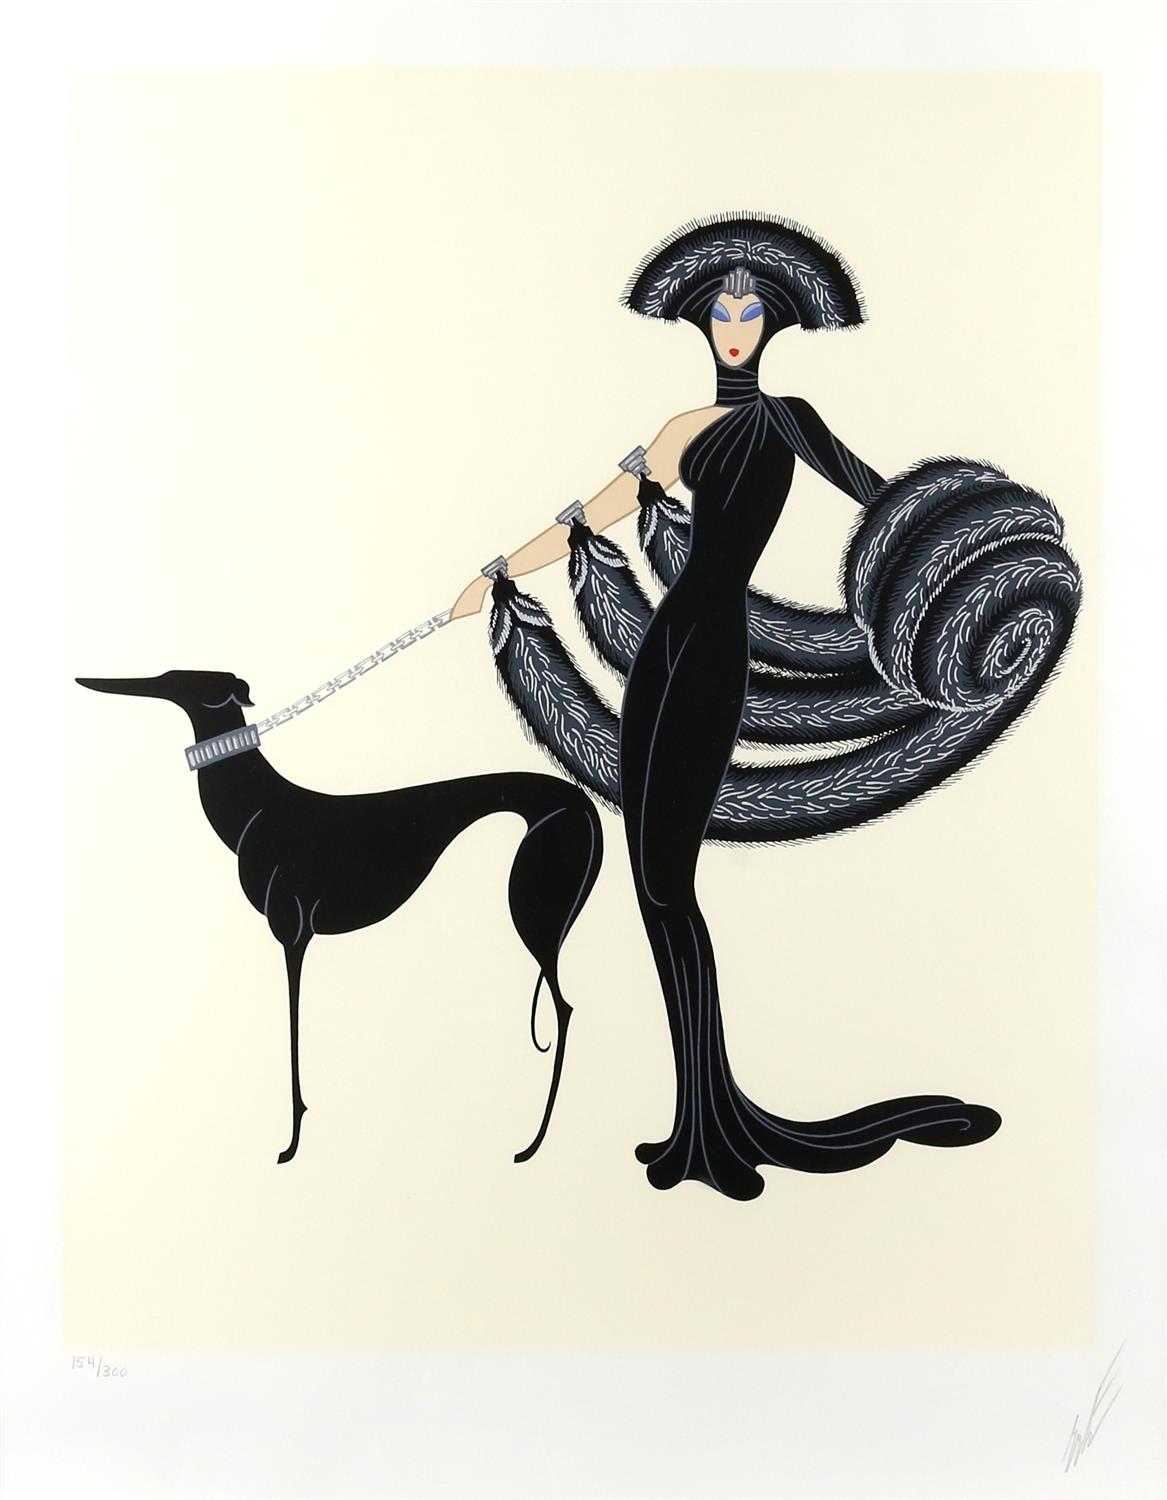 Erte (Russian / French, 1892-1990) (Romain de Tirtoff). 'Symphony in Black', limited edition